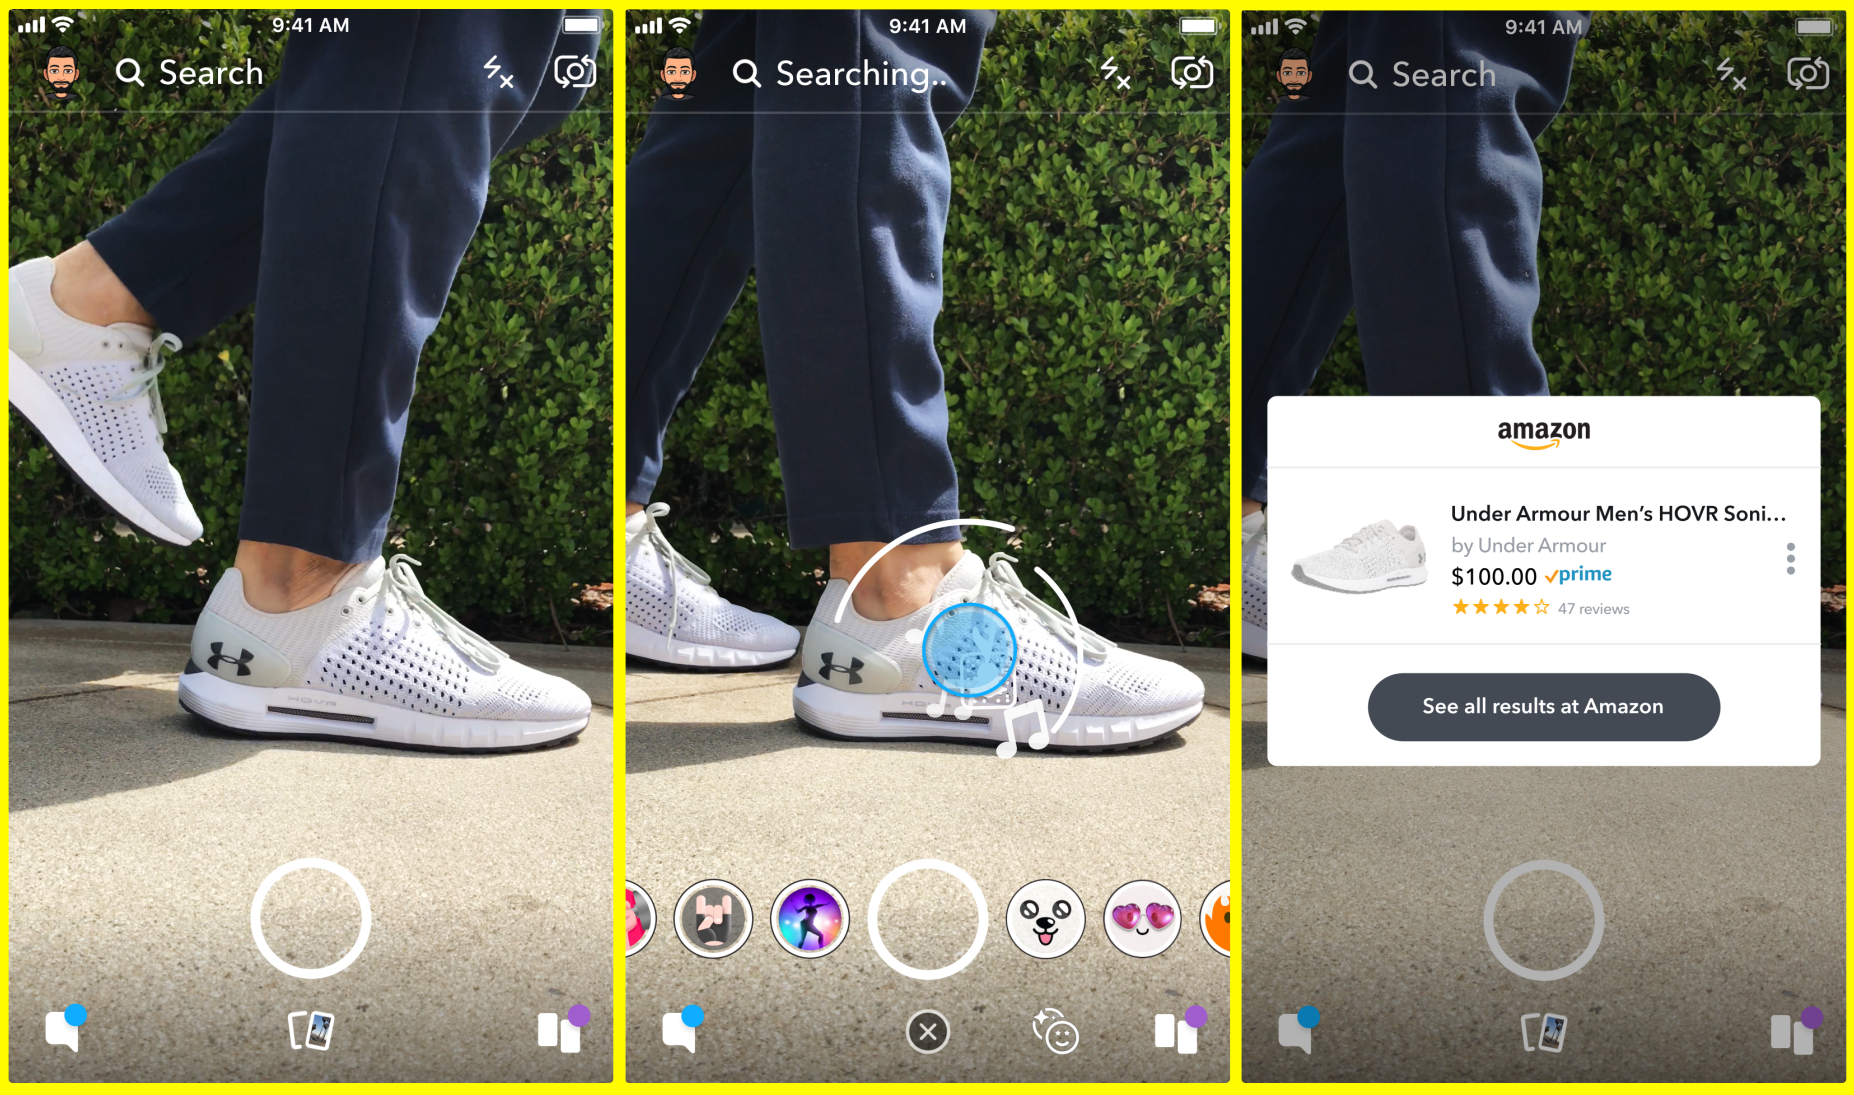  Snapchat’s Visual Search in action: Scanning some shoes brings up the corresponding Amazon product page. 